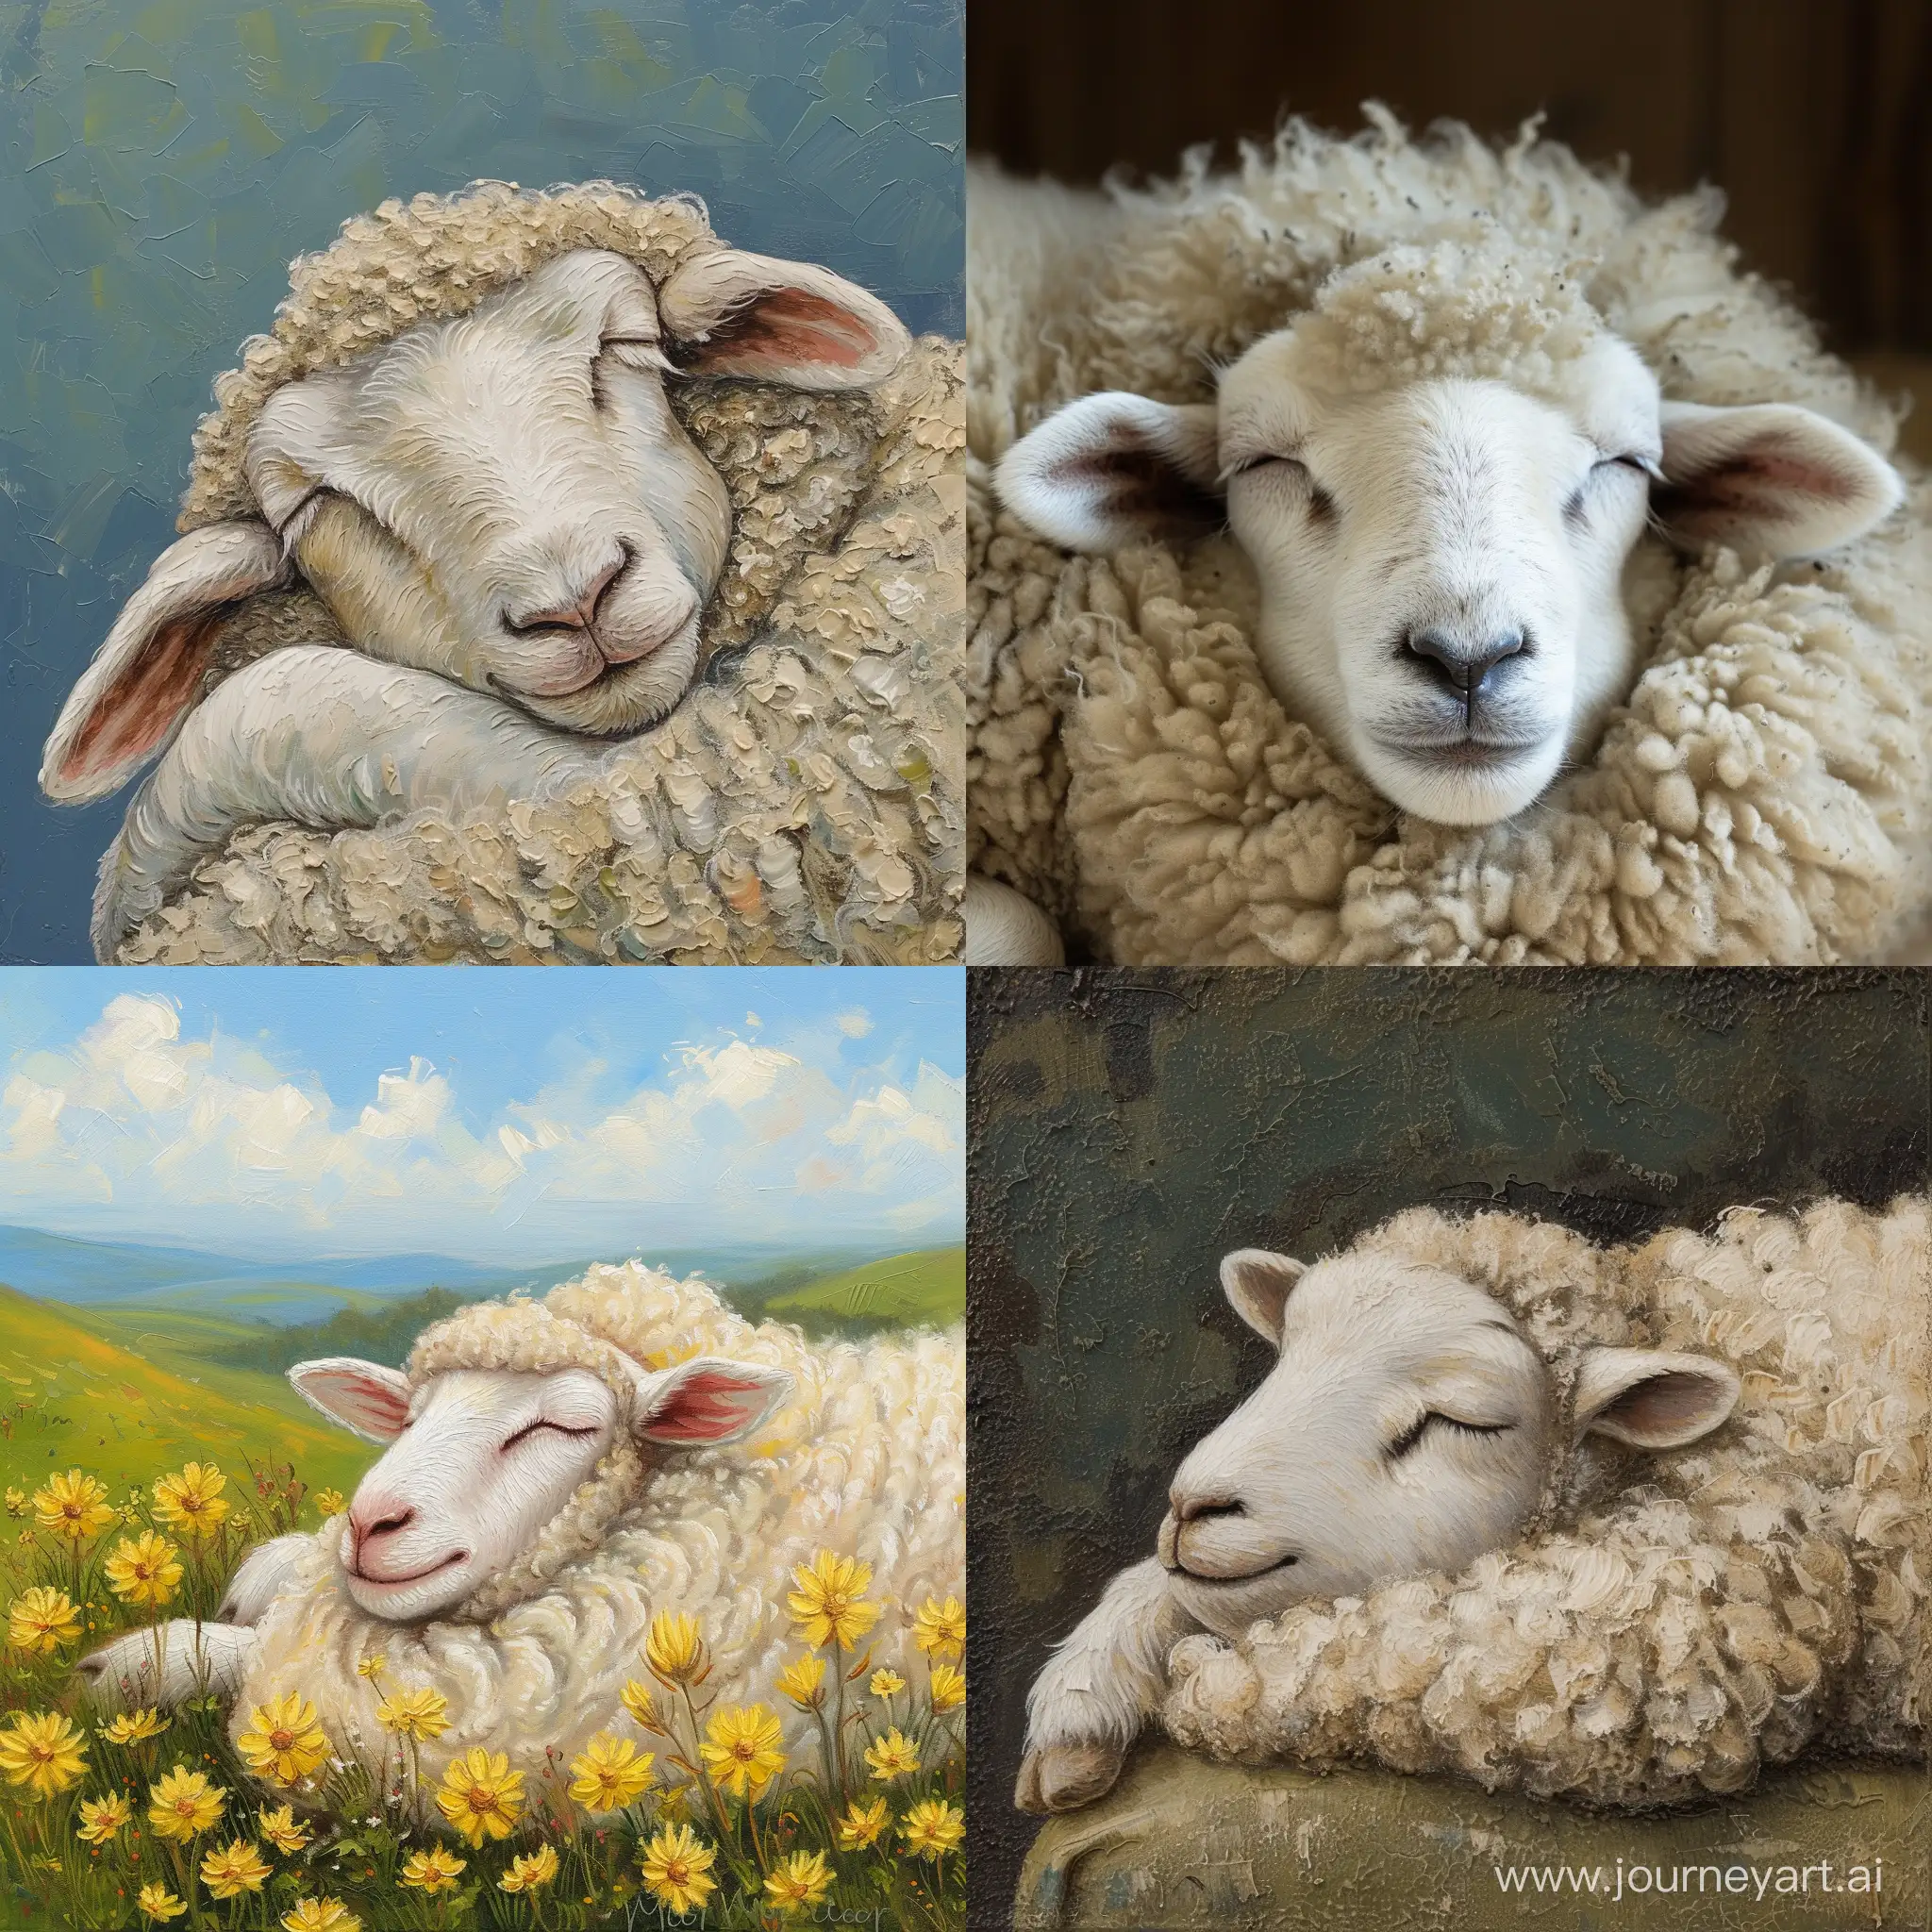 Peaceful-Slumber-of-a-Resting-Sheep-in-a-Serene-Meadow